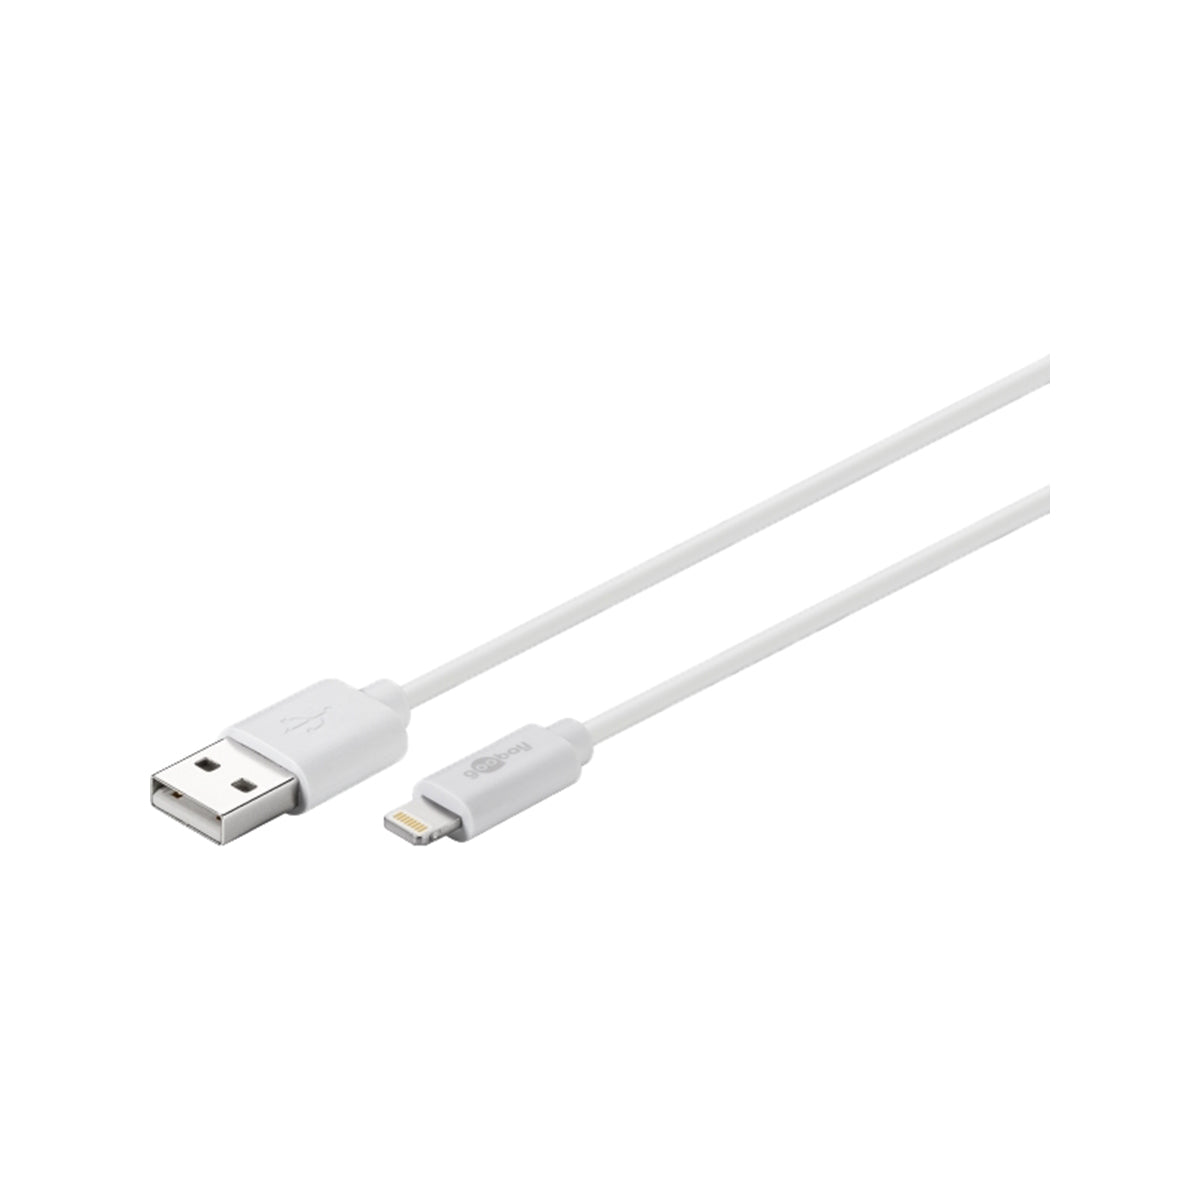 Goobay USB-A to Lightning Charging and Sync Cable 1m for iPhone/iPad/iPod/AirPod - White